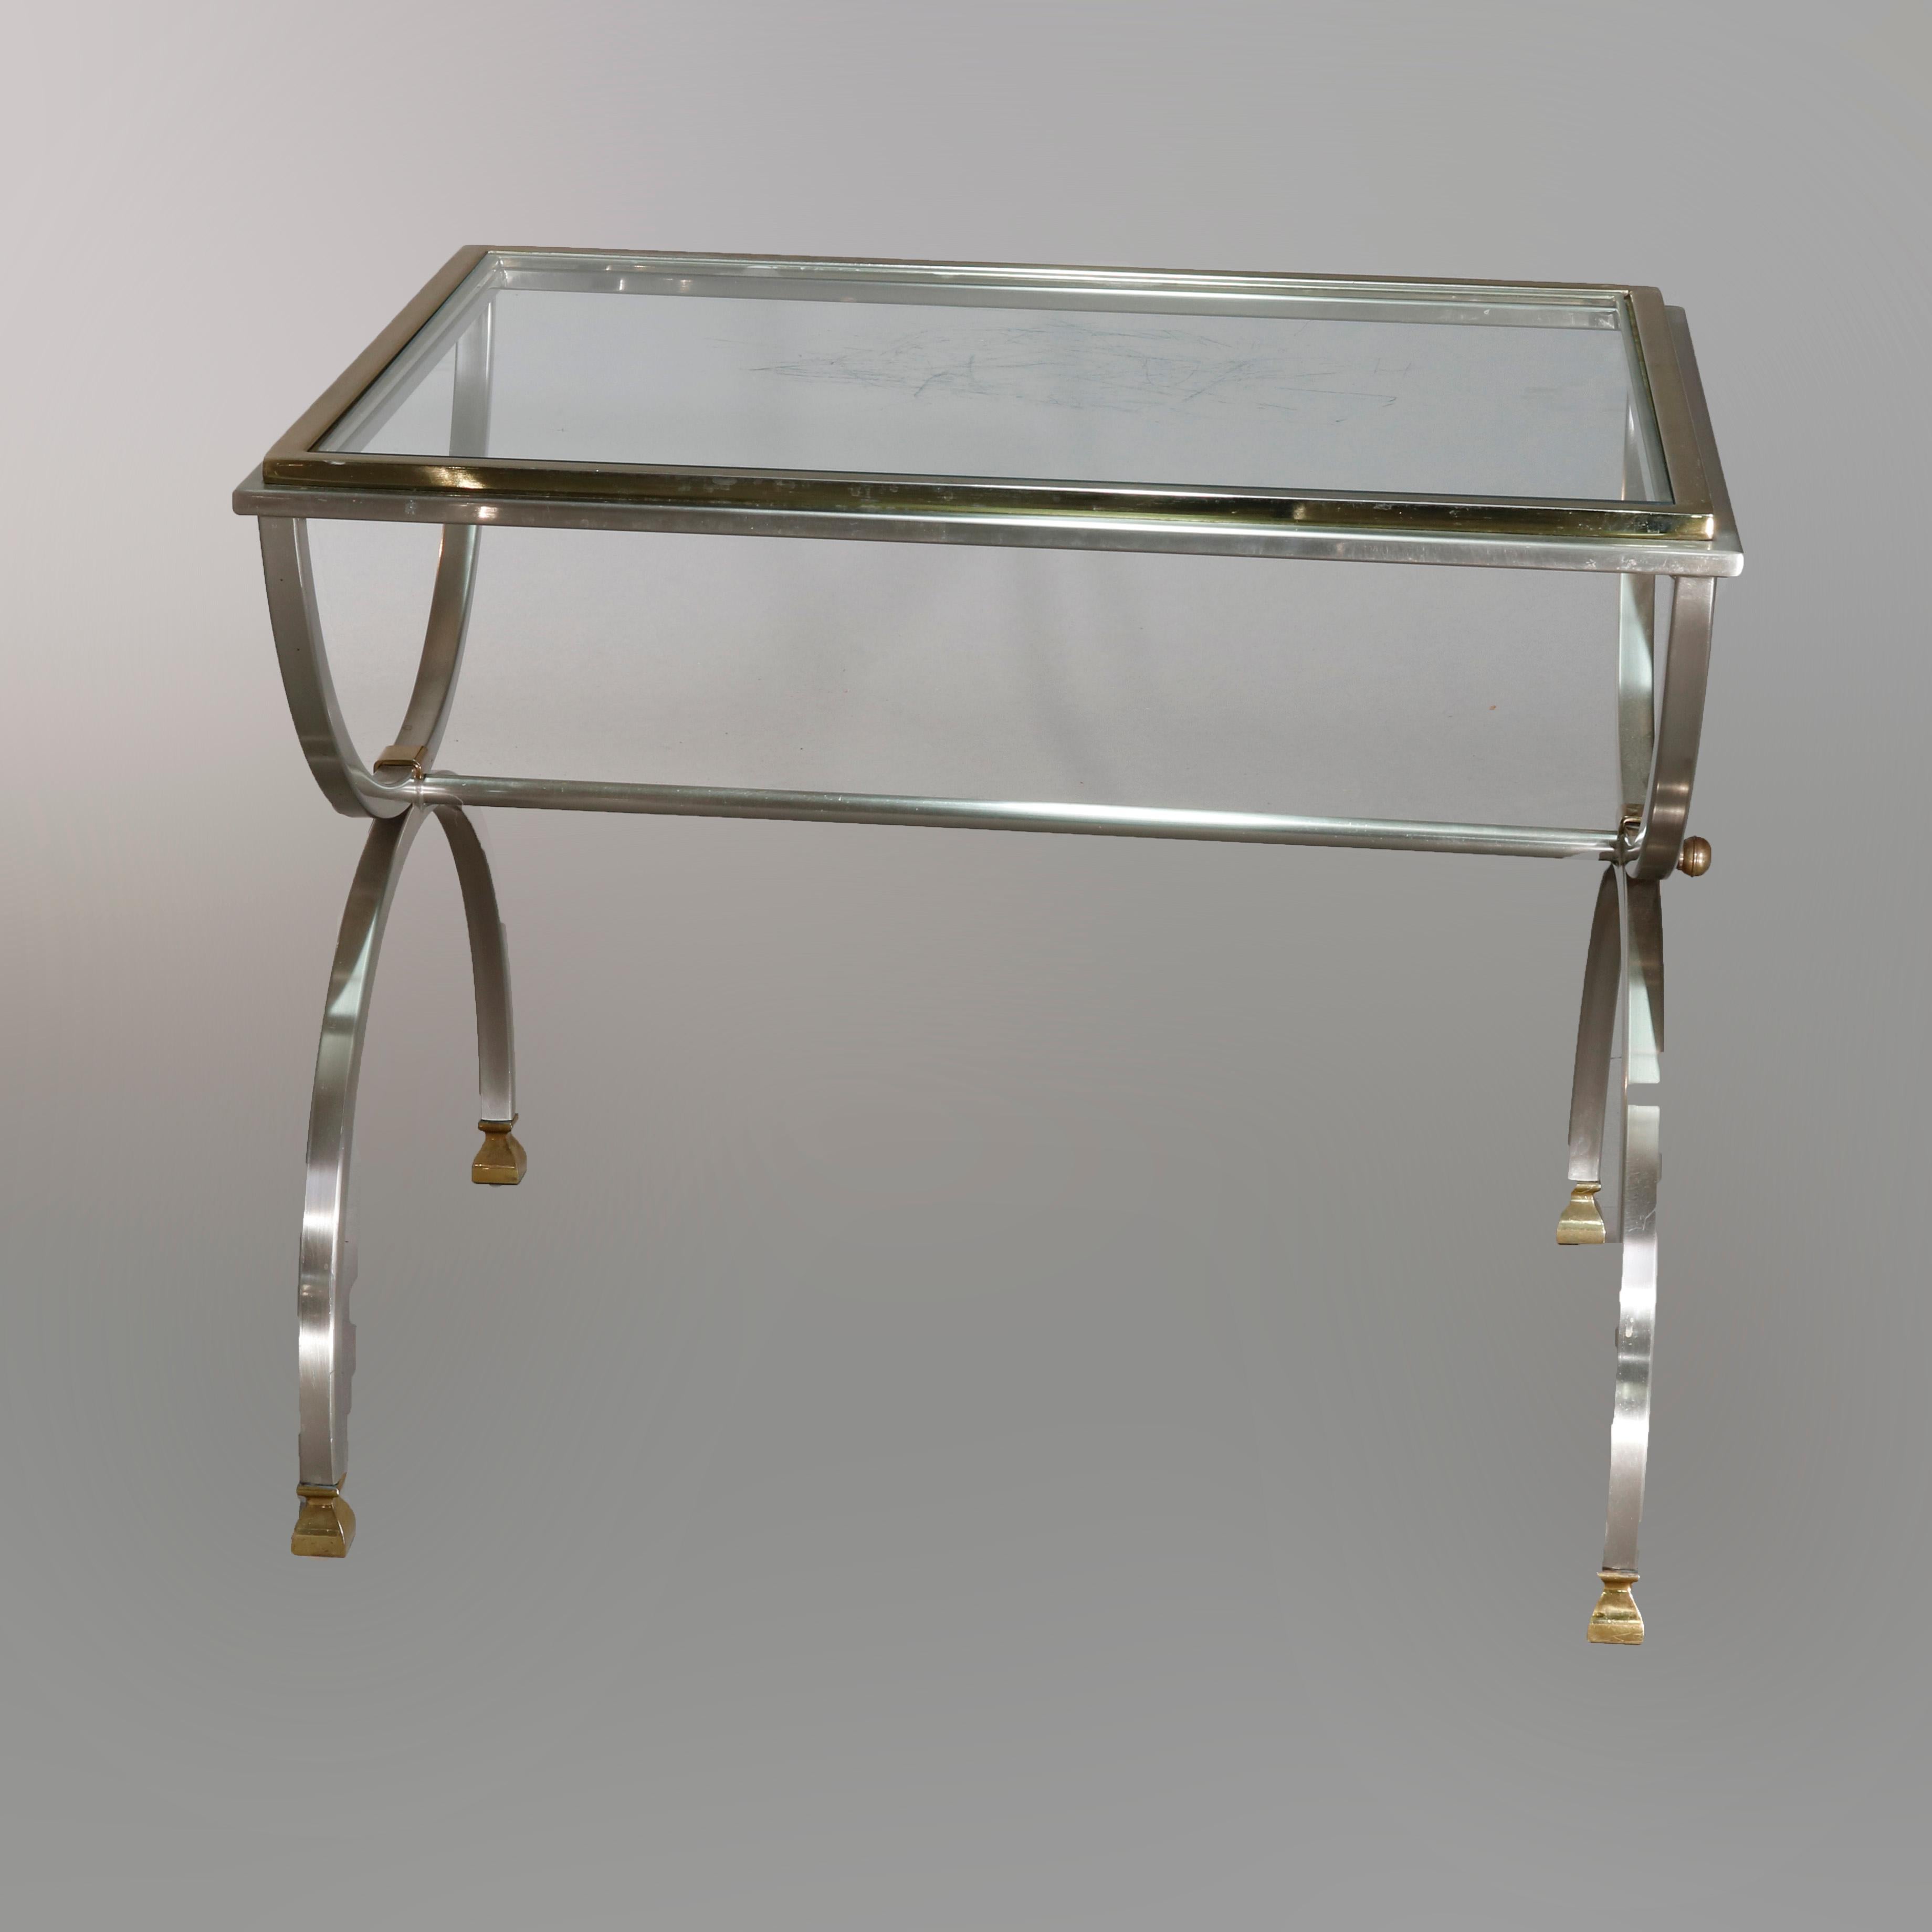 A pair of Mid-Century Modern Savonarola end stands offer carule x-form chrome bases with glass tops, mid-20th century

Measures: 22